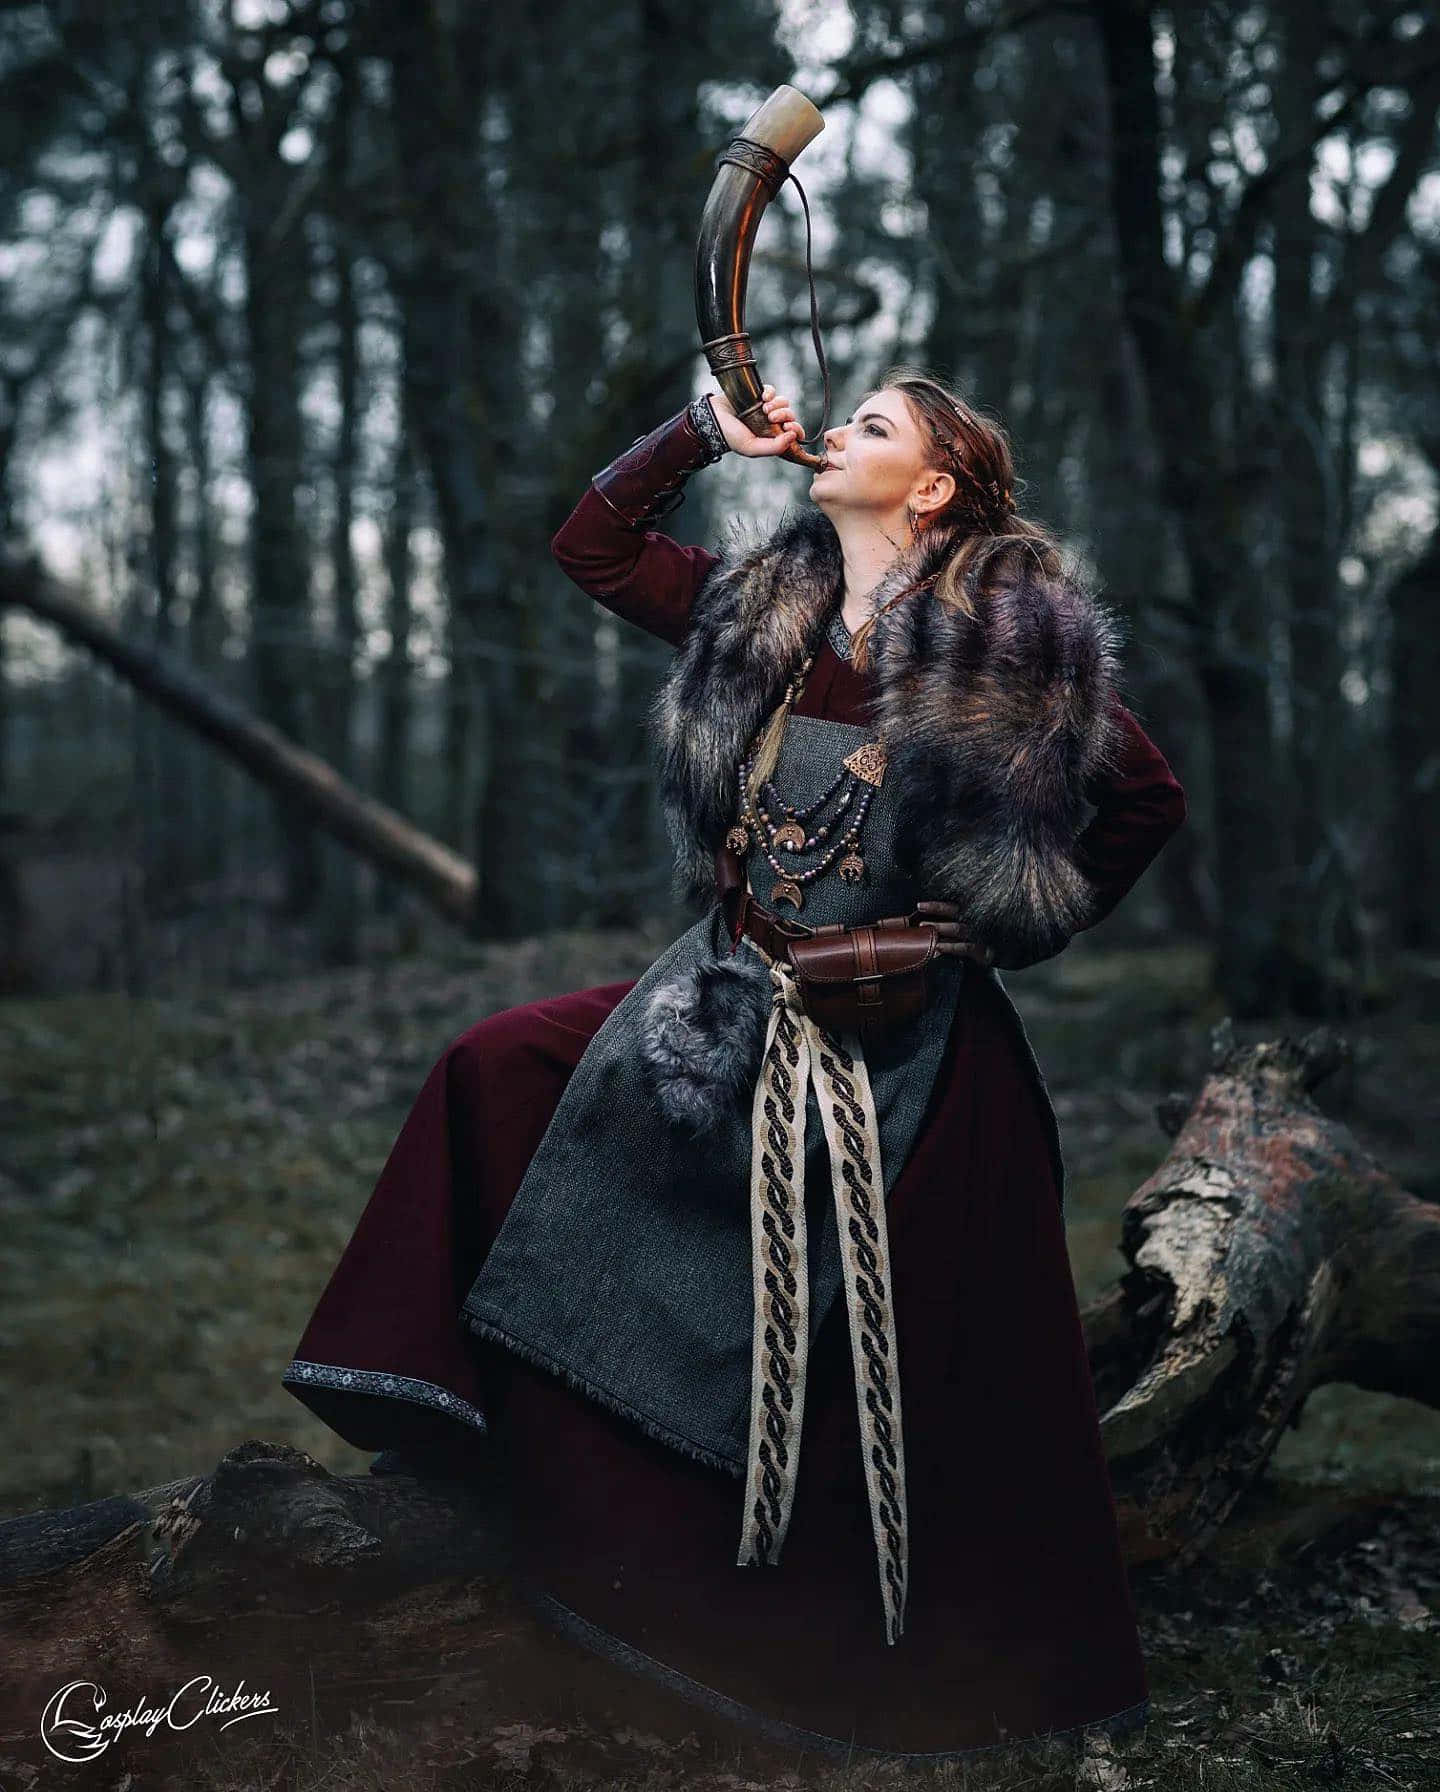 Viking Woman In A Fur Coat Drinking From A Horn